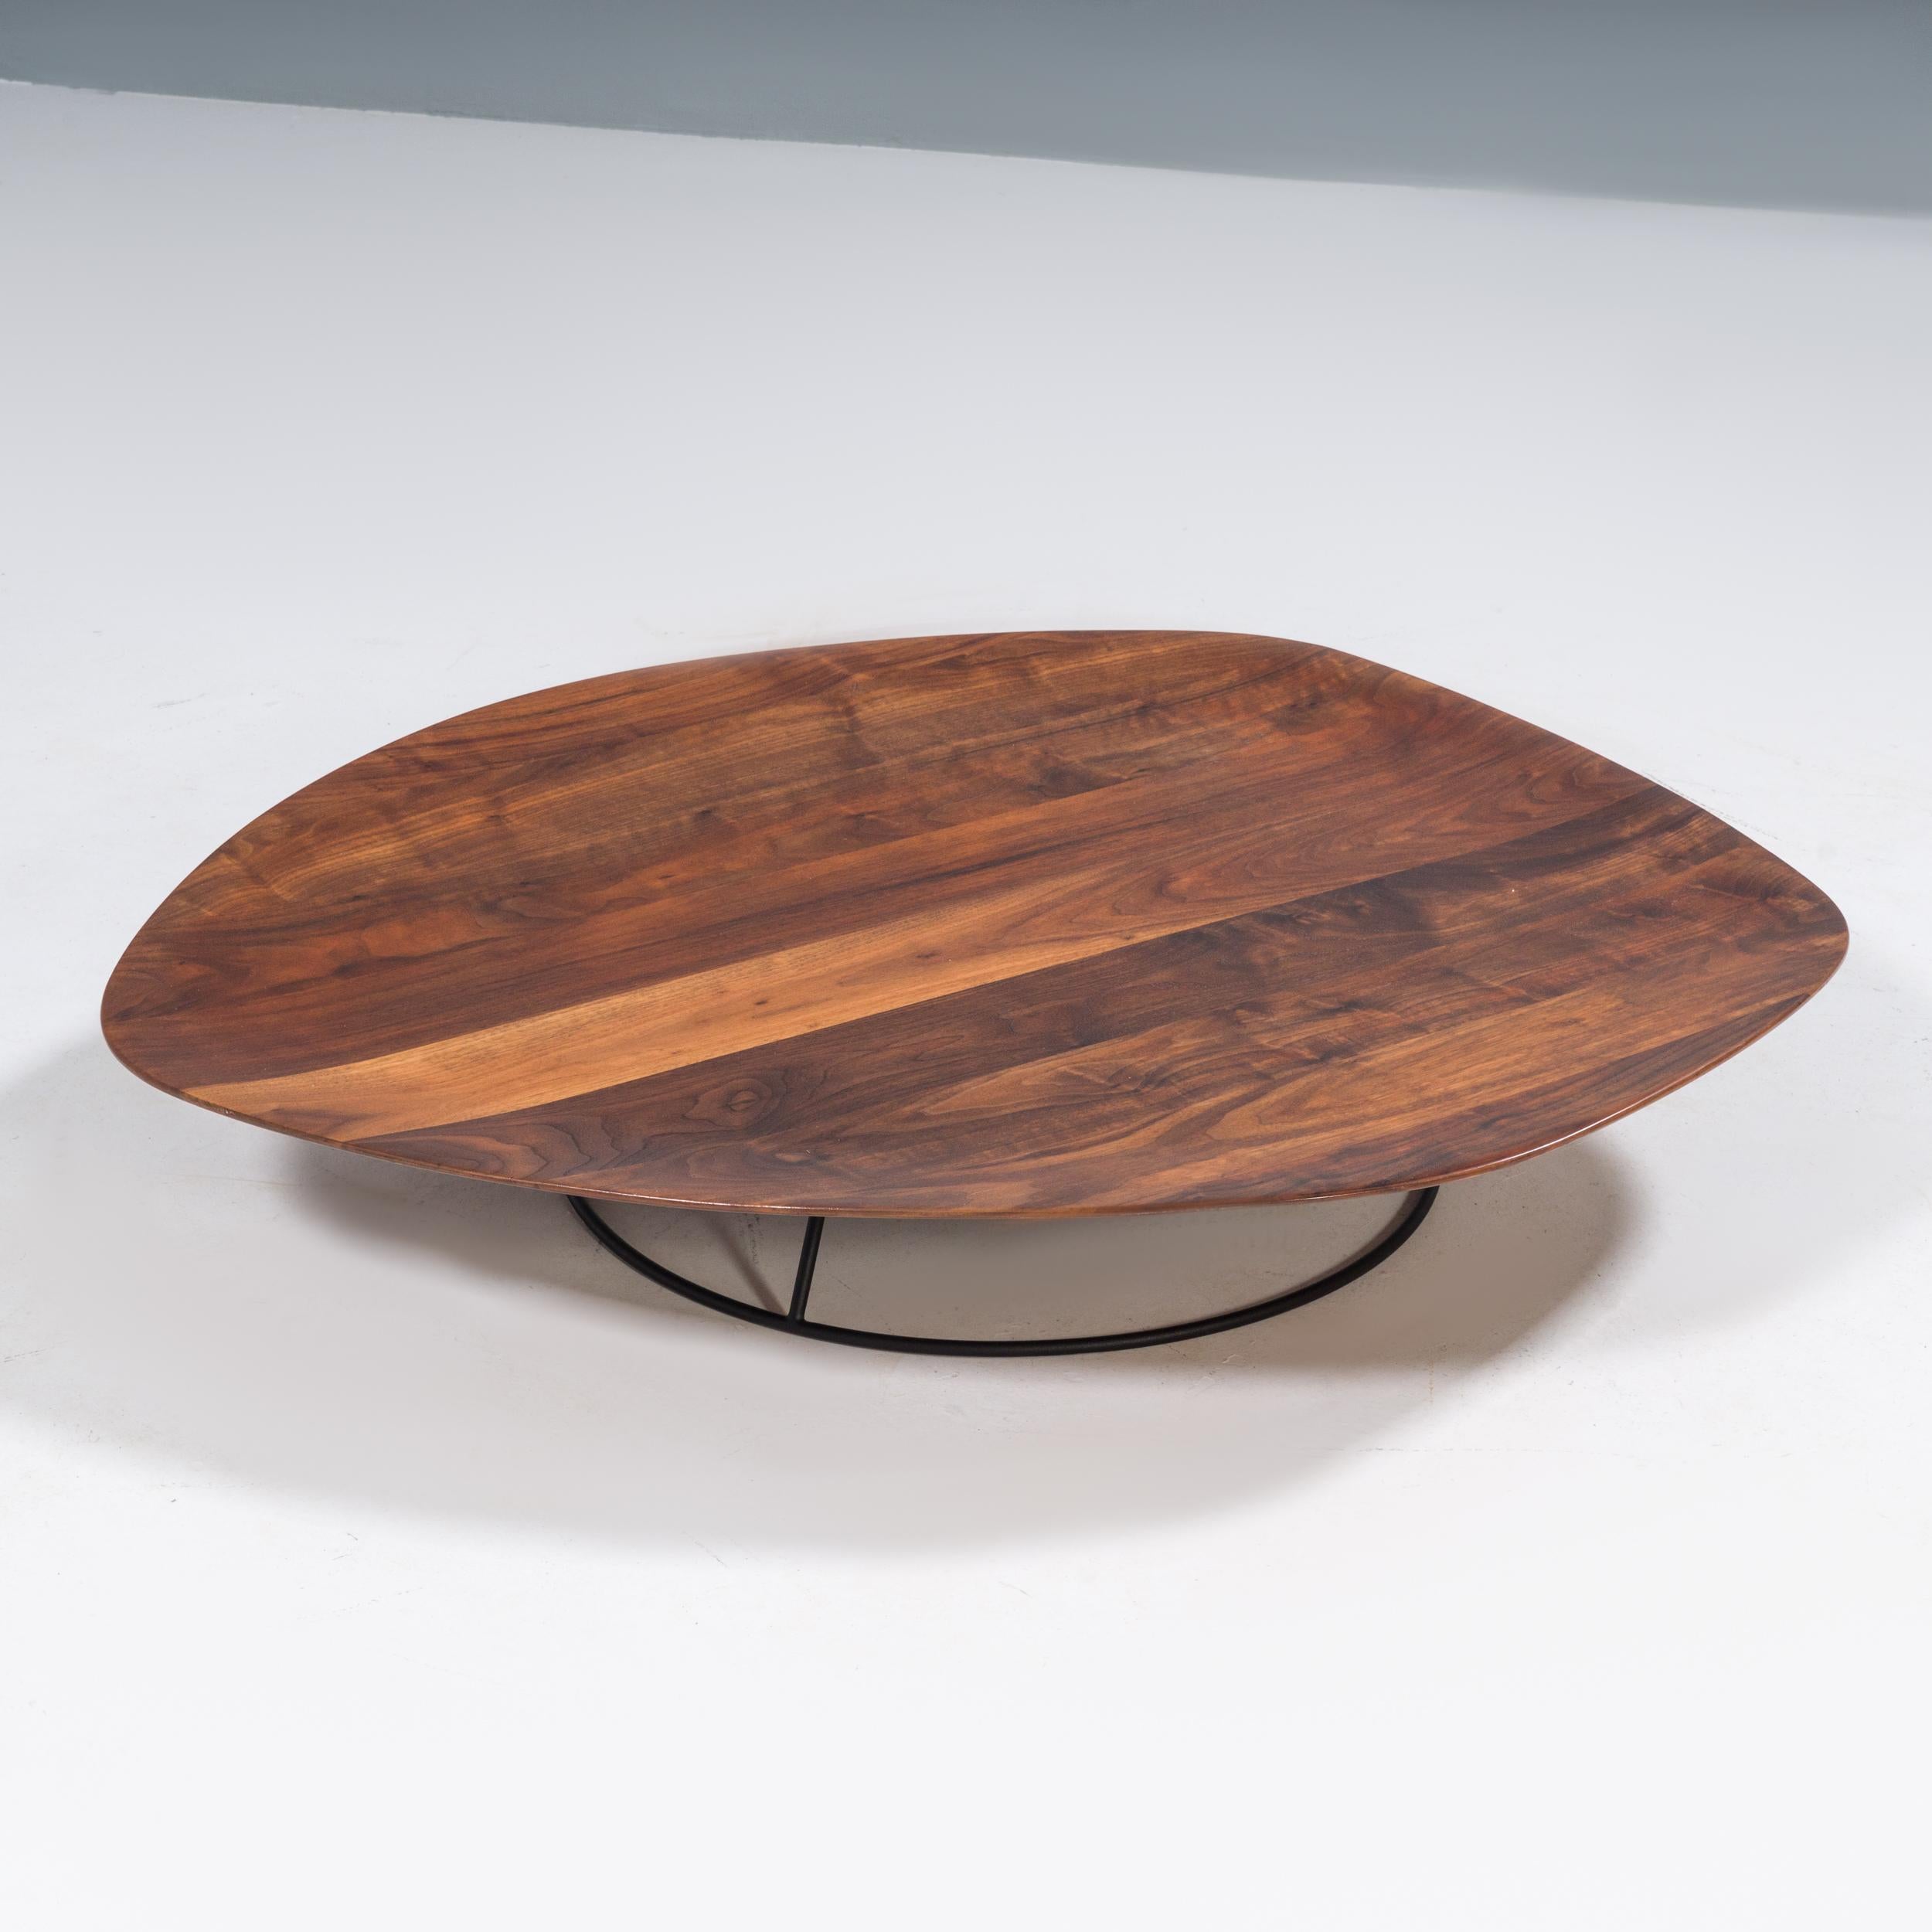 Originally designed by Nathan Young for Ligne Roset in 2008, the Pebble table is a fantastic example of modern design.

Inspired by the form of a stone eroded by a flowing river, the Pebble table has a fluid, organic form.

Featuring a carved